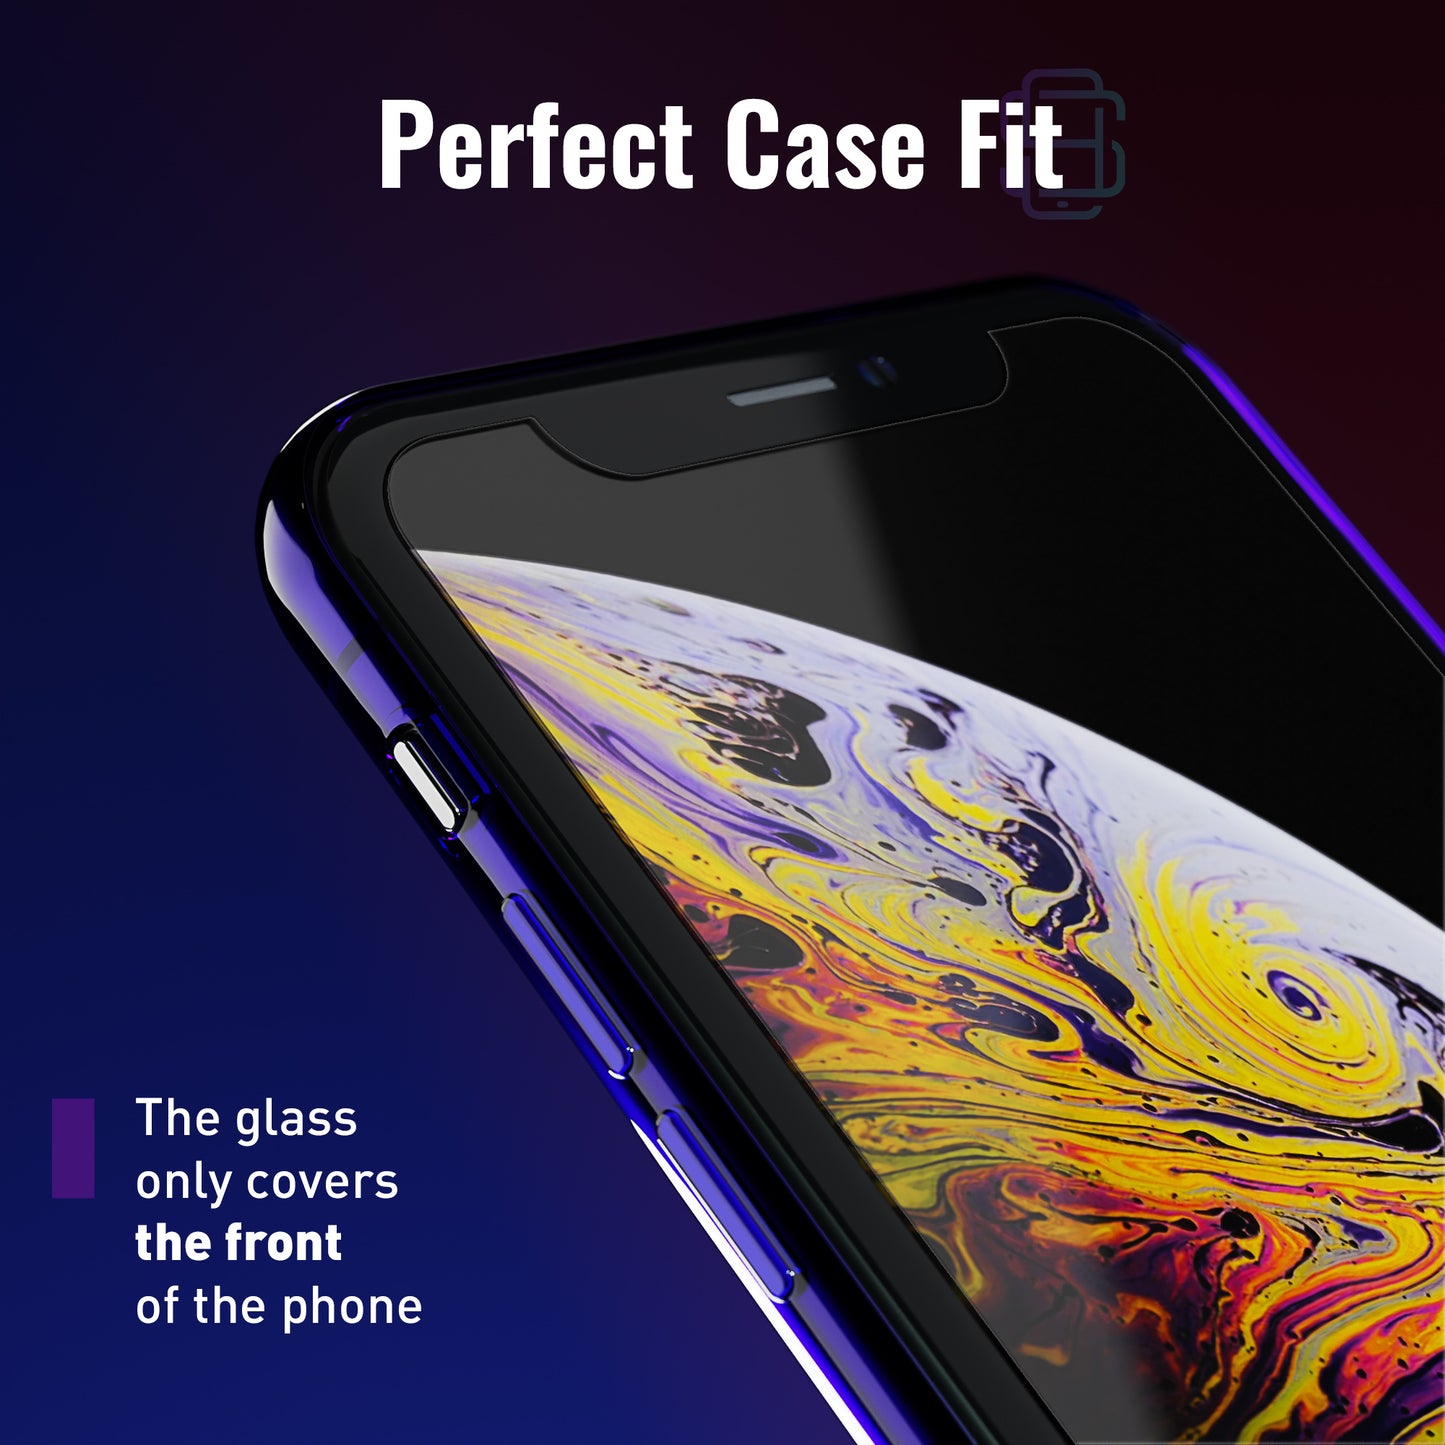 Defenslim iPhone XS Max Screen Protector [2-Pack] with Easy Auto-Align Install Kit